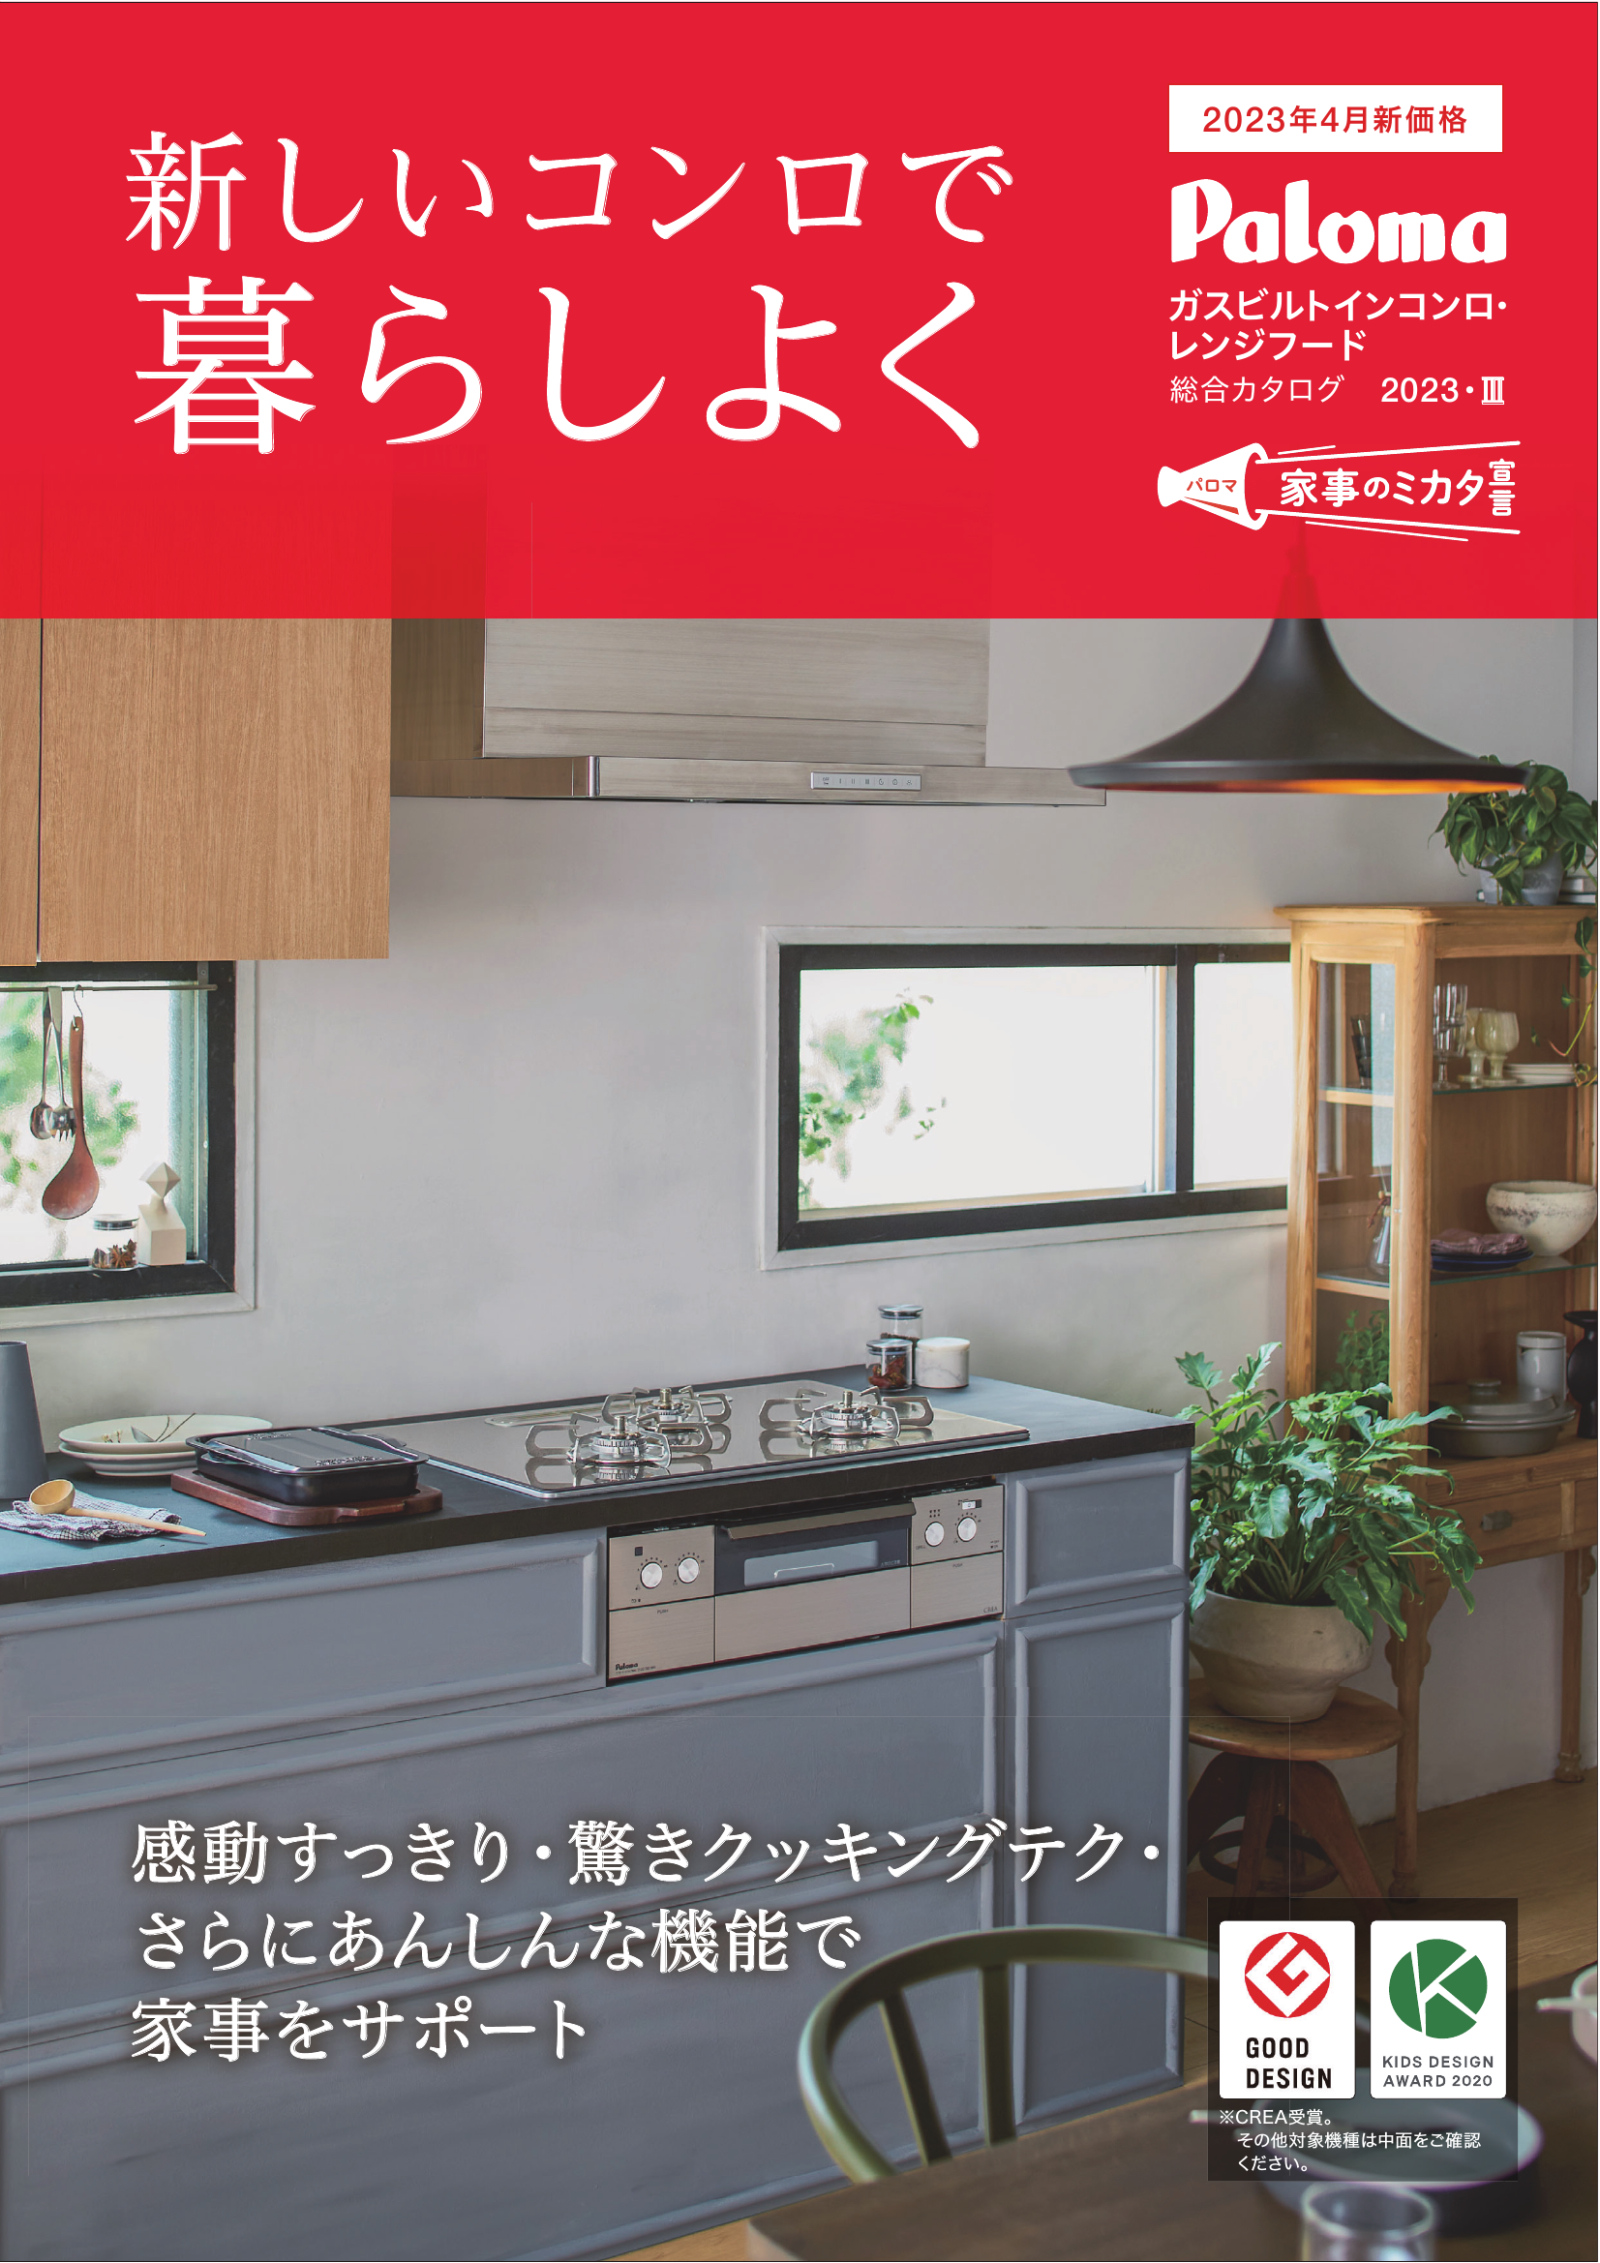 Gas Built in Hob – Japanese version